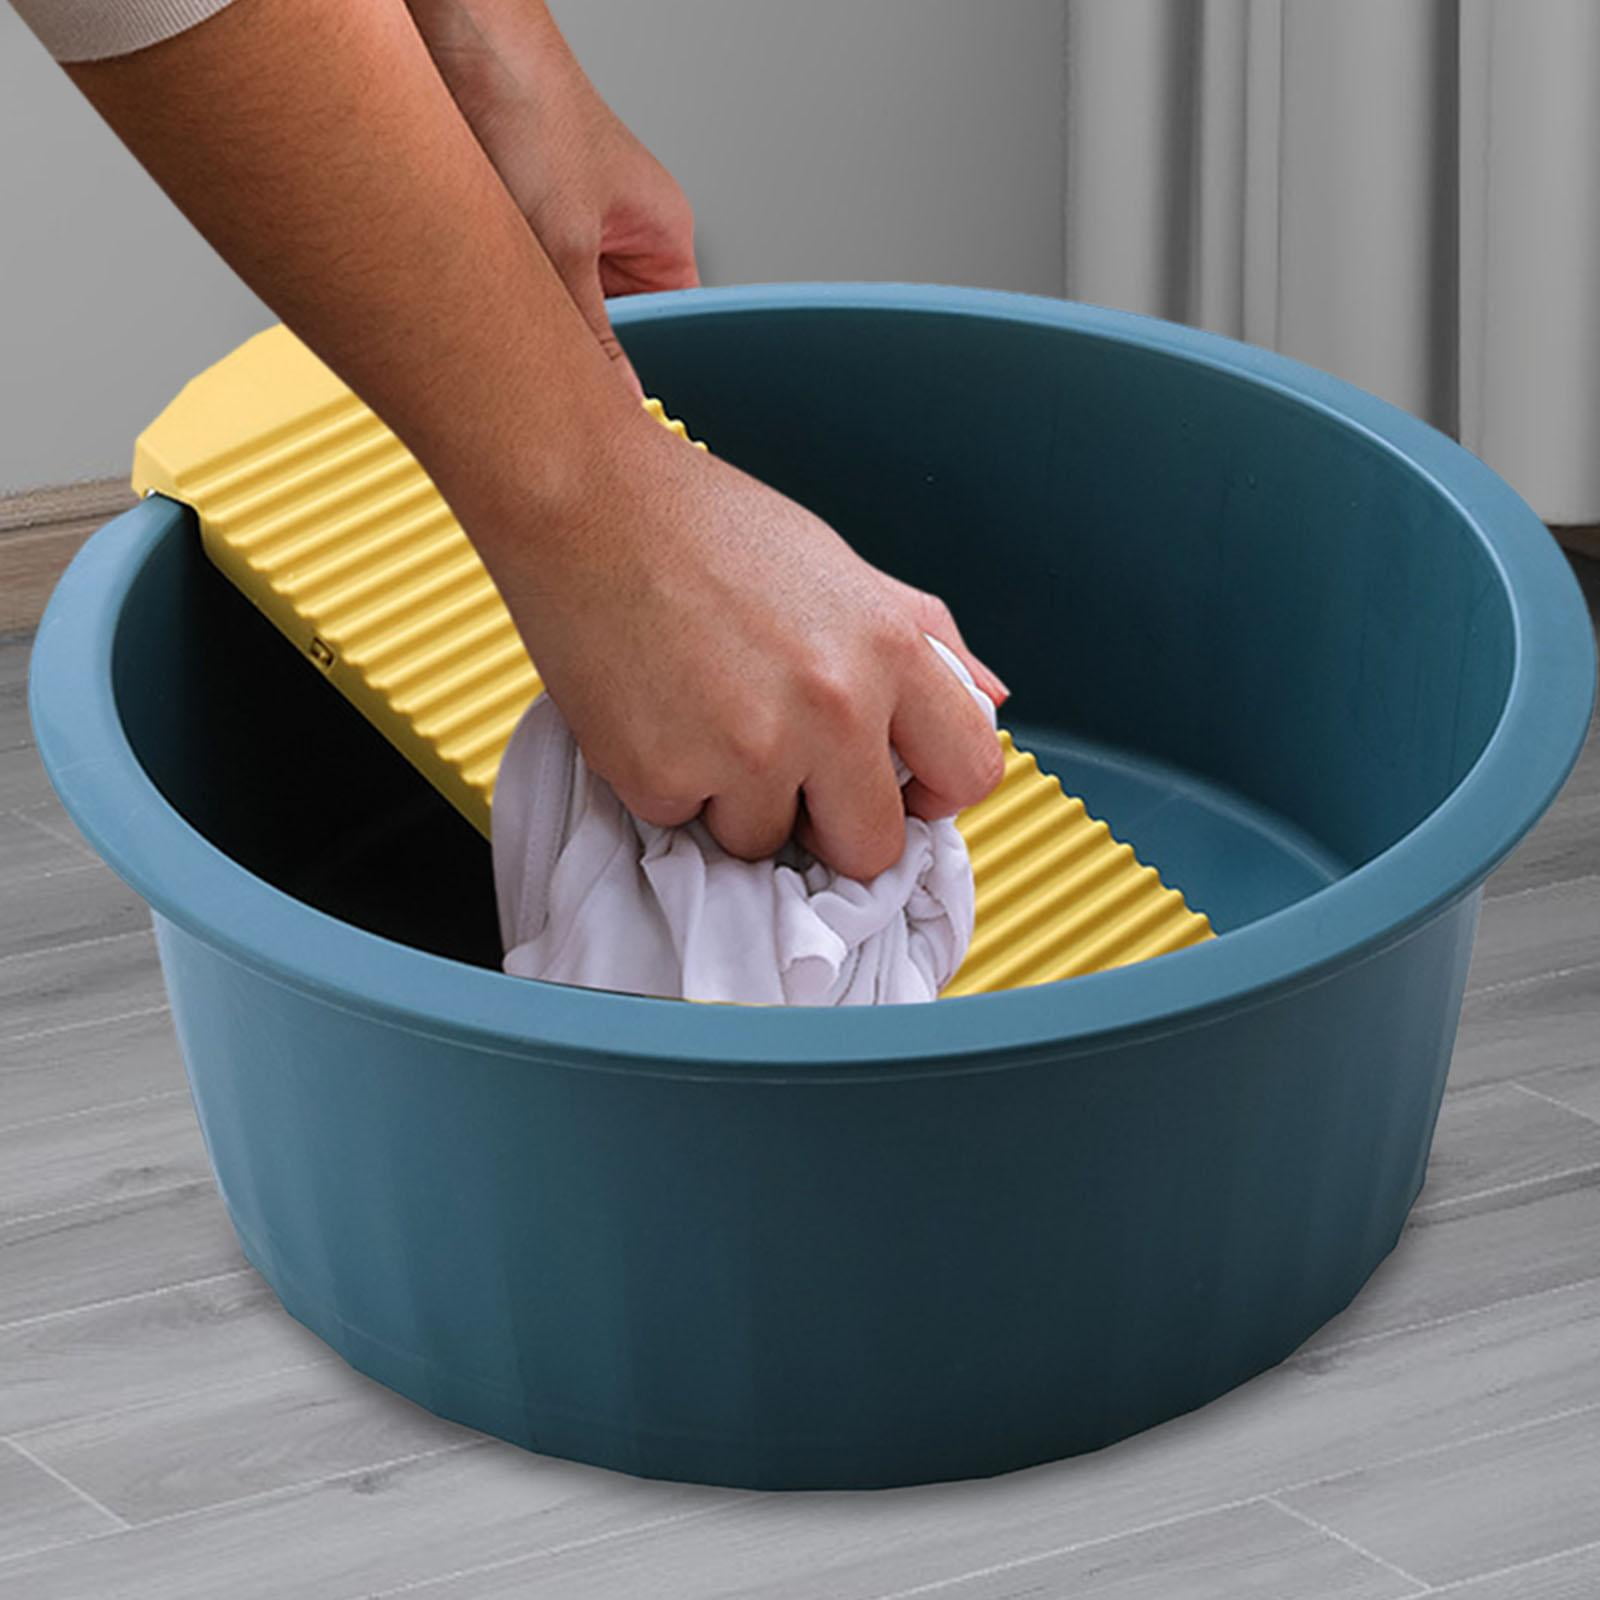 Laundry Wash Basin with Washboard: Washing Clothes Bucket Hand Wash Board  Plastic Basin for Laundry Japanese Laundry Tub for Diaper T Shirt Underwear